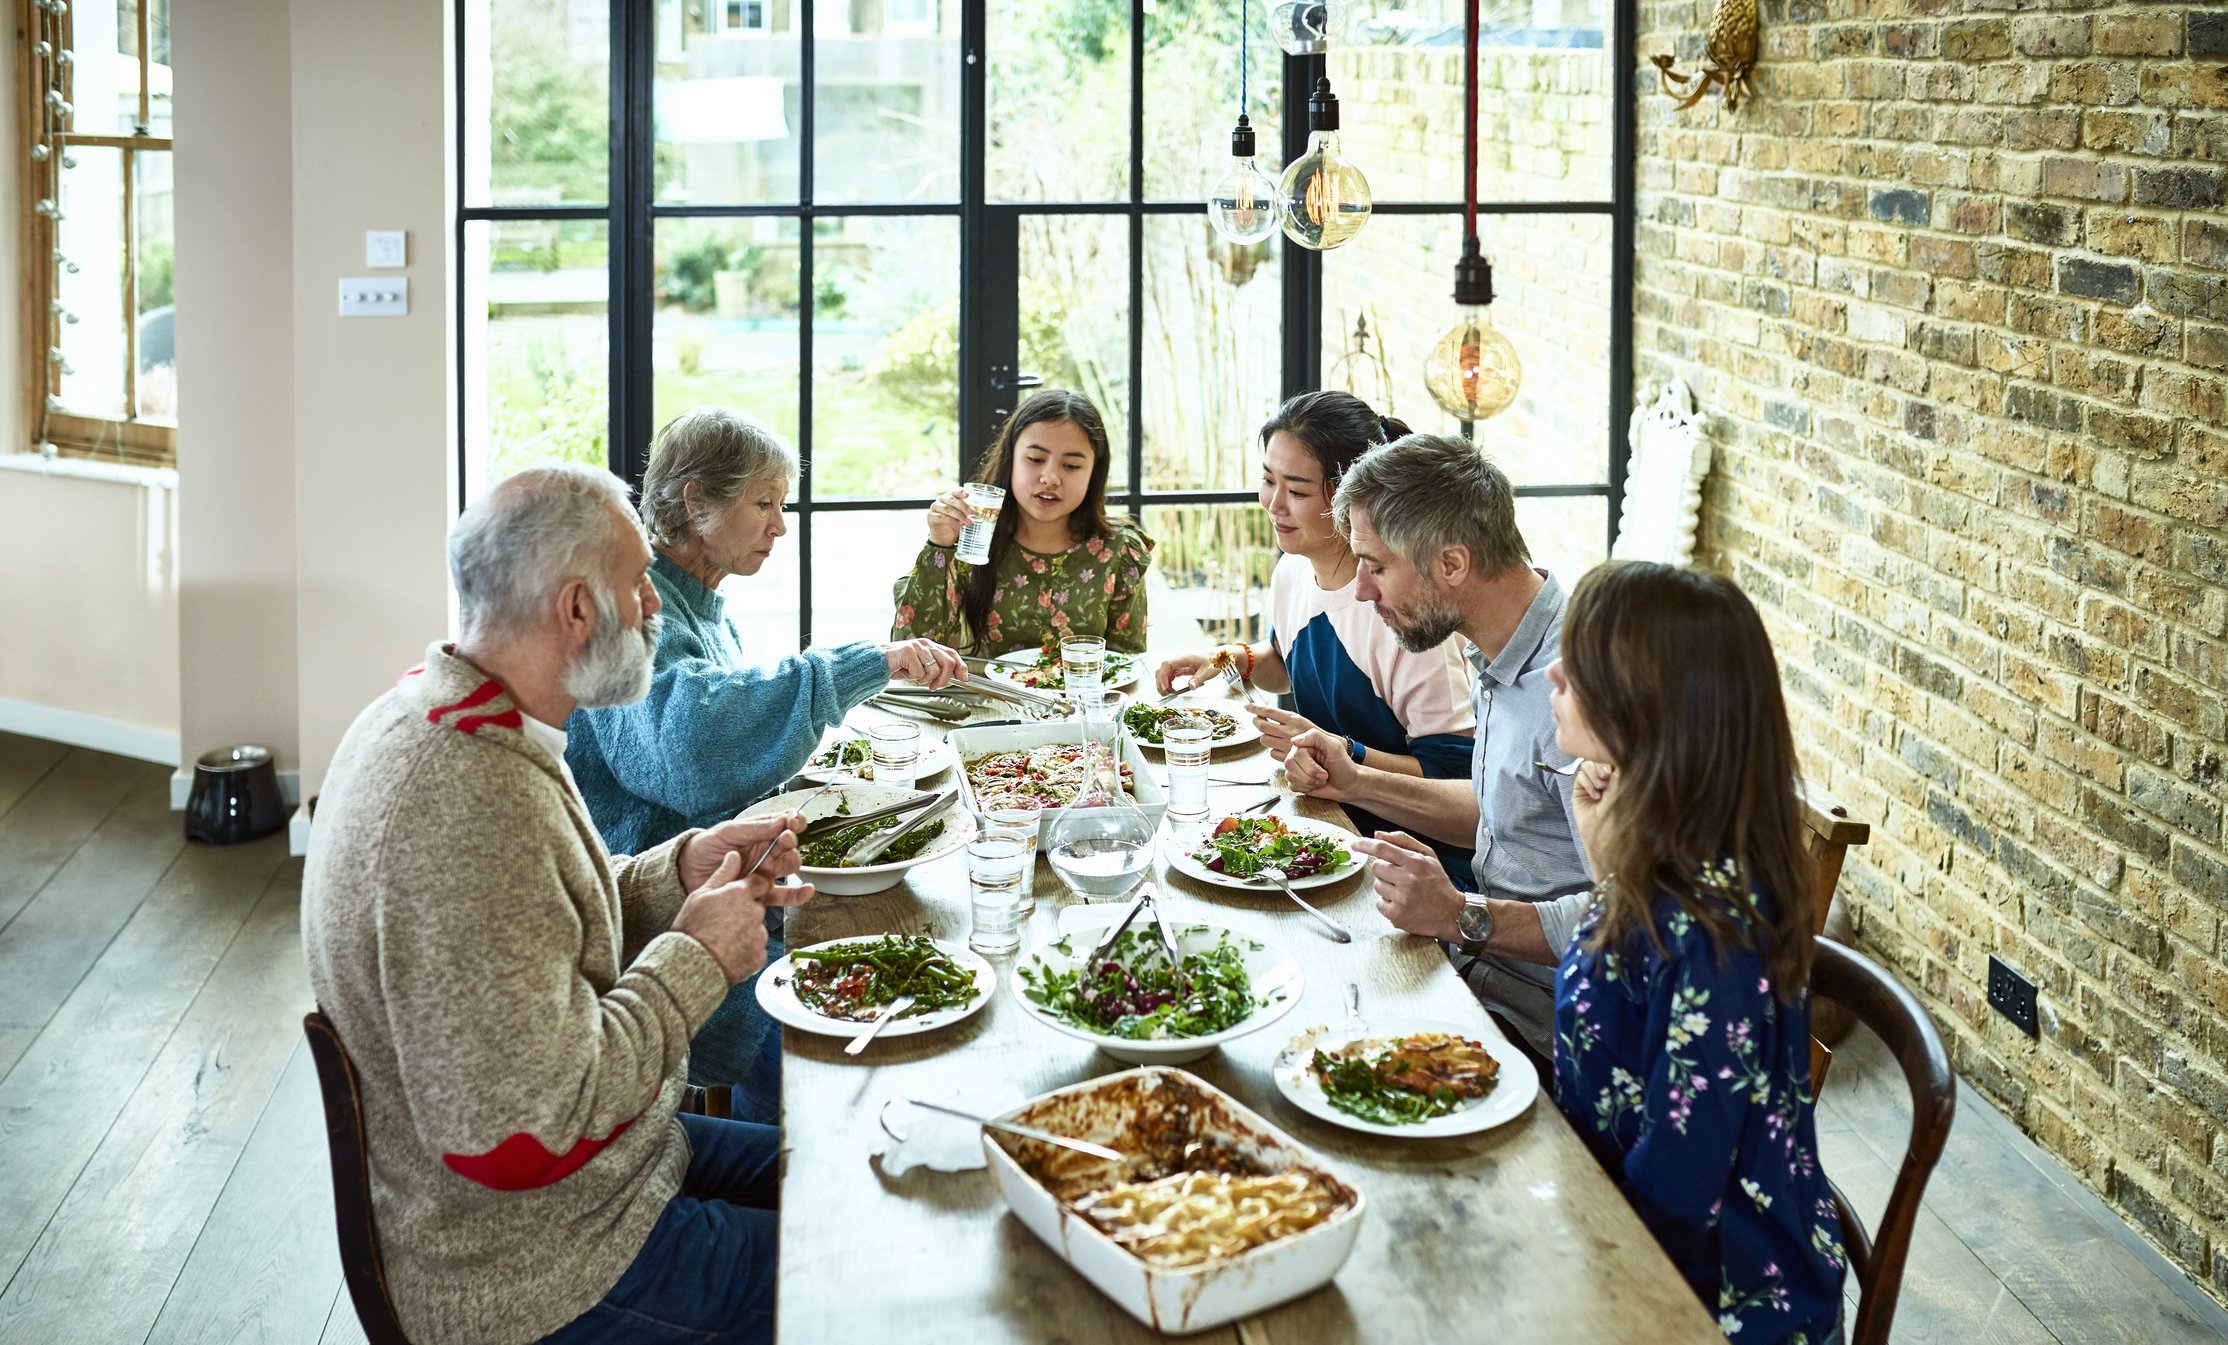 Family of six enjoying a meal together at a dining table